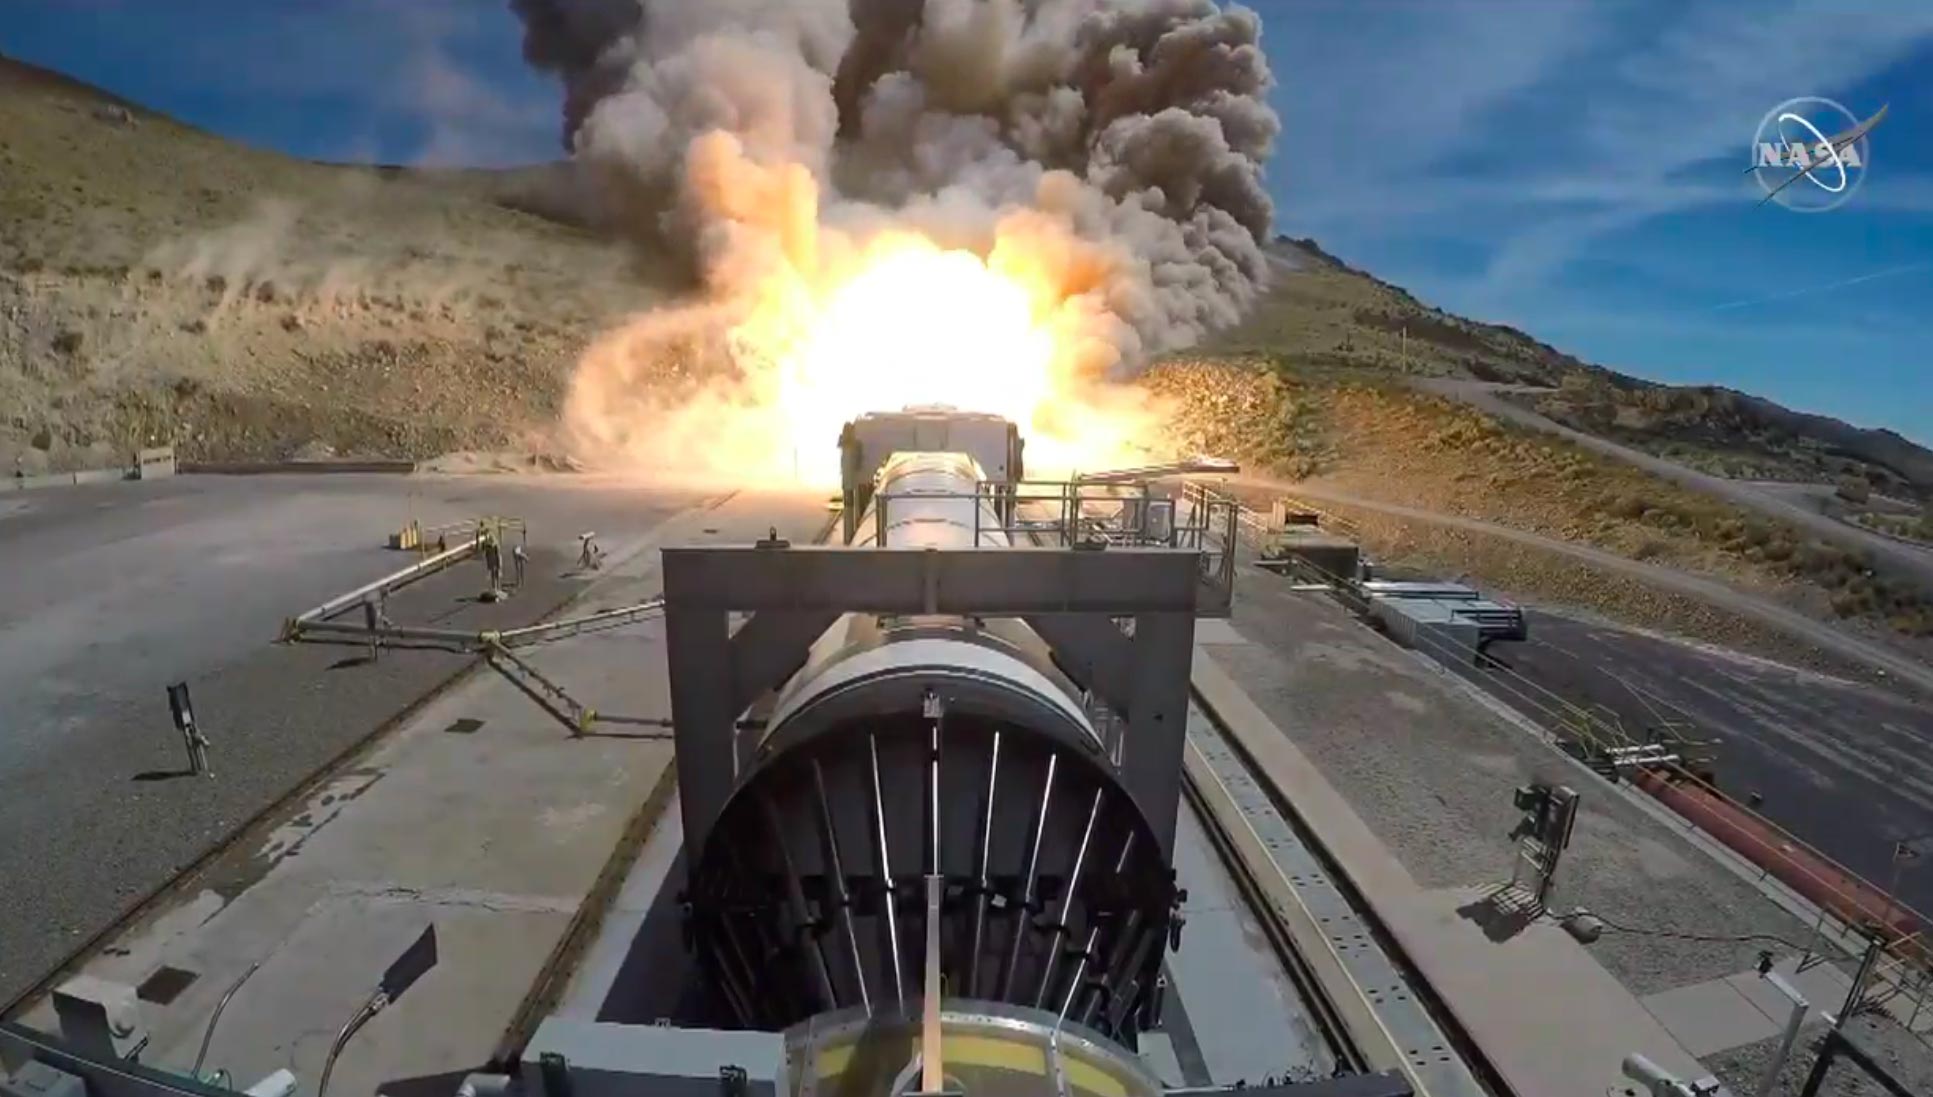 STATIC FIRE FOOTAGE OF NASAS SLS BOOSTER